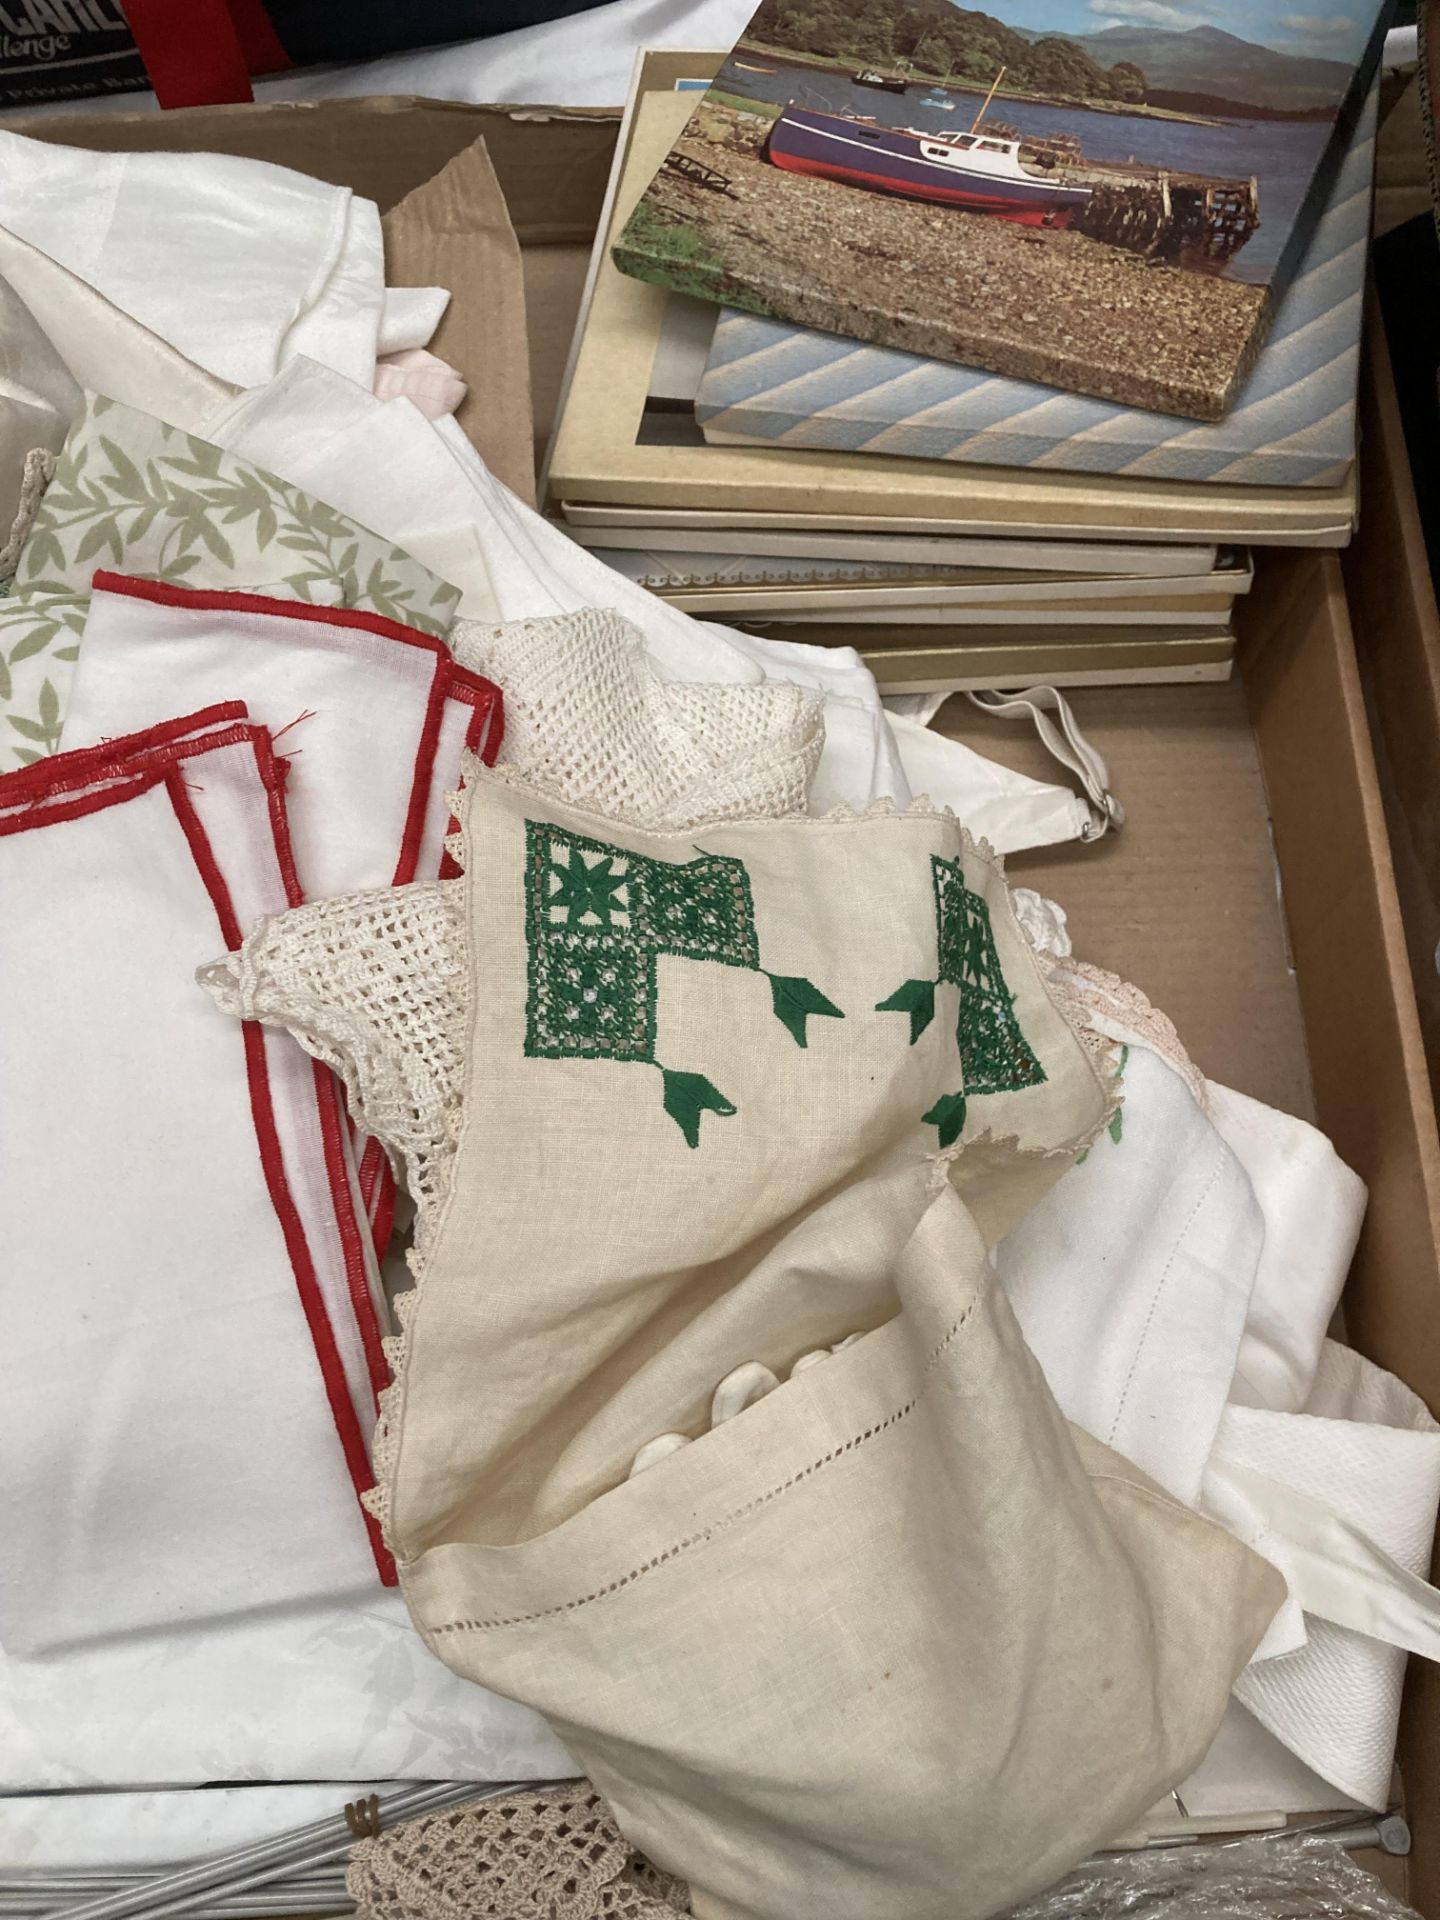 Contents to tray a large quantity of assorted linen table cloths, mats, - Image 2 of 3